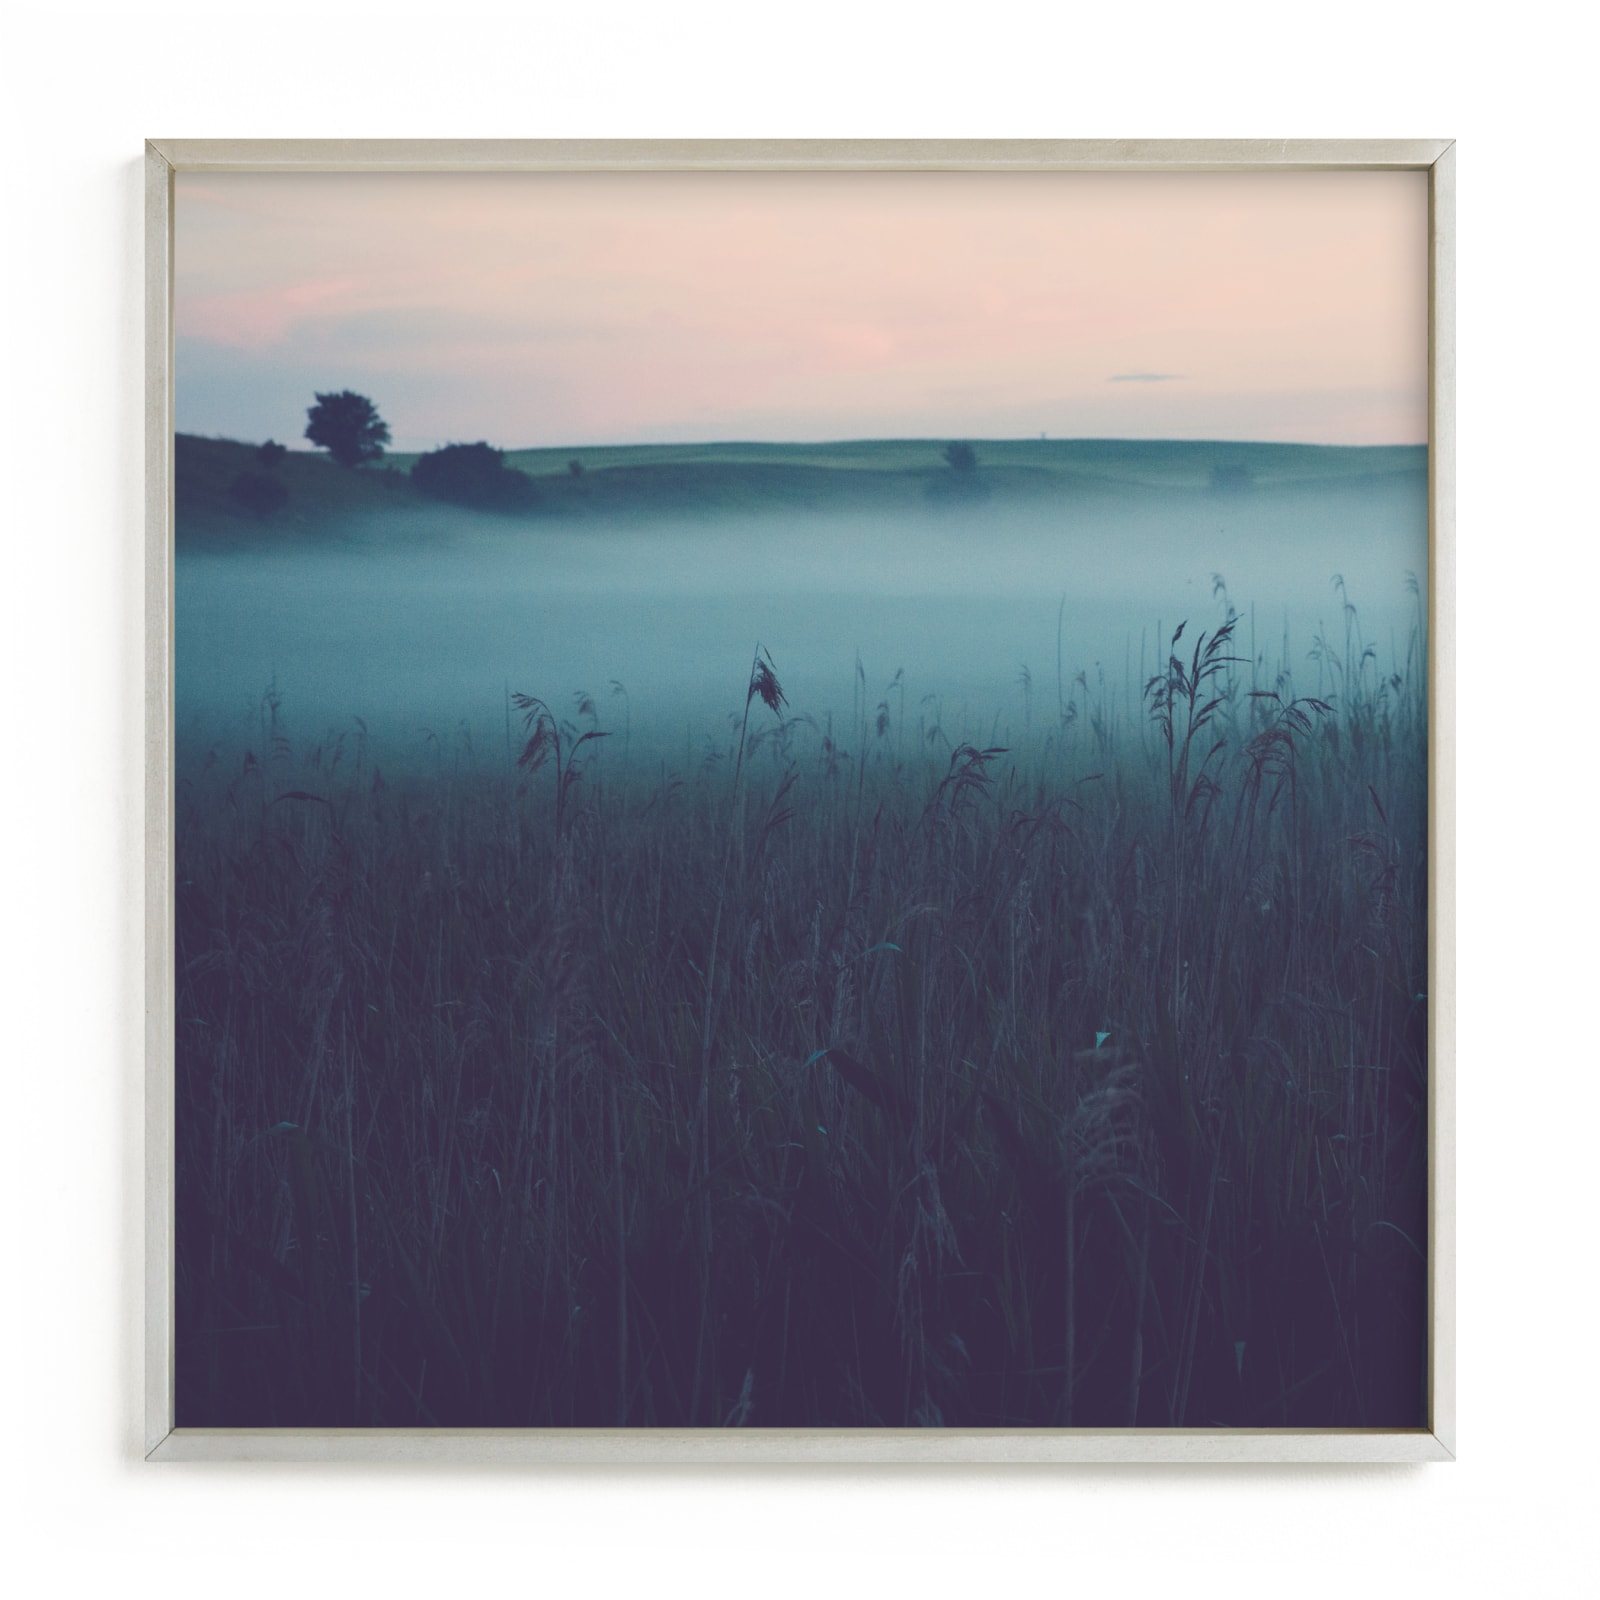 "MYSTERY TRIPTYCH COLOR II" by Lying on the grass in beautiful frame options and a variety of sizes.